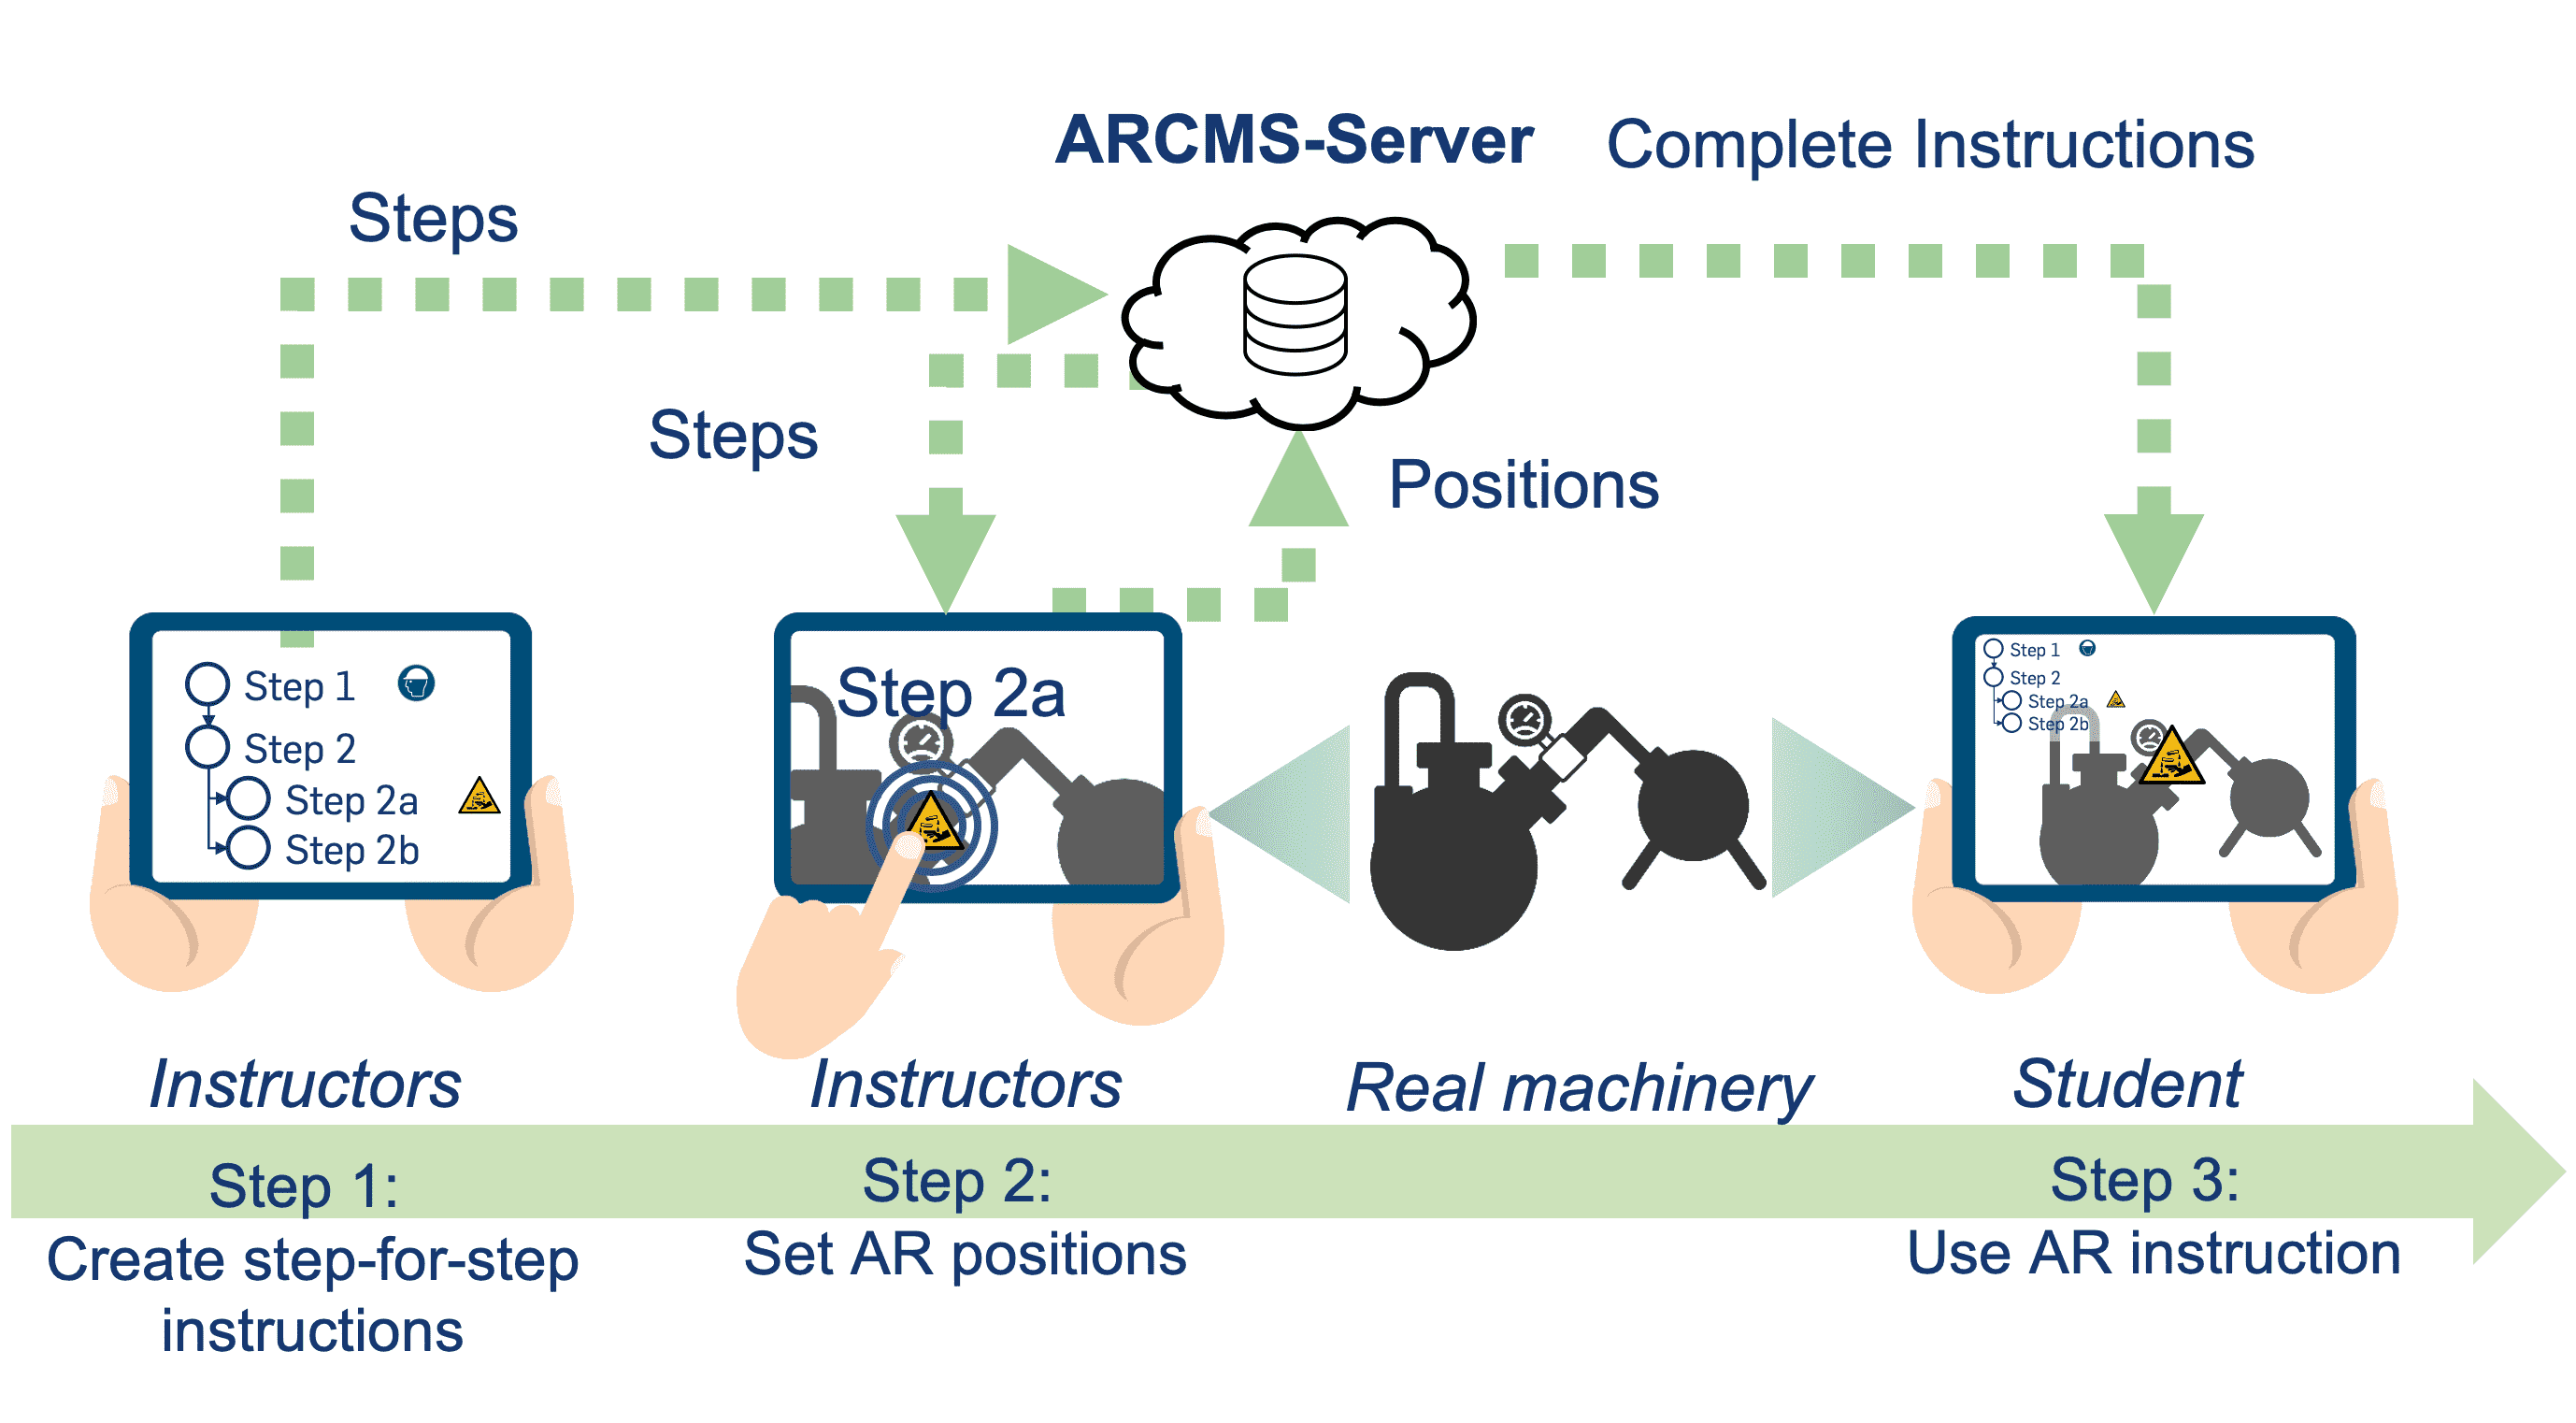 The concept of ARCMS